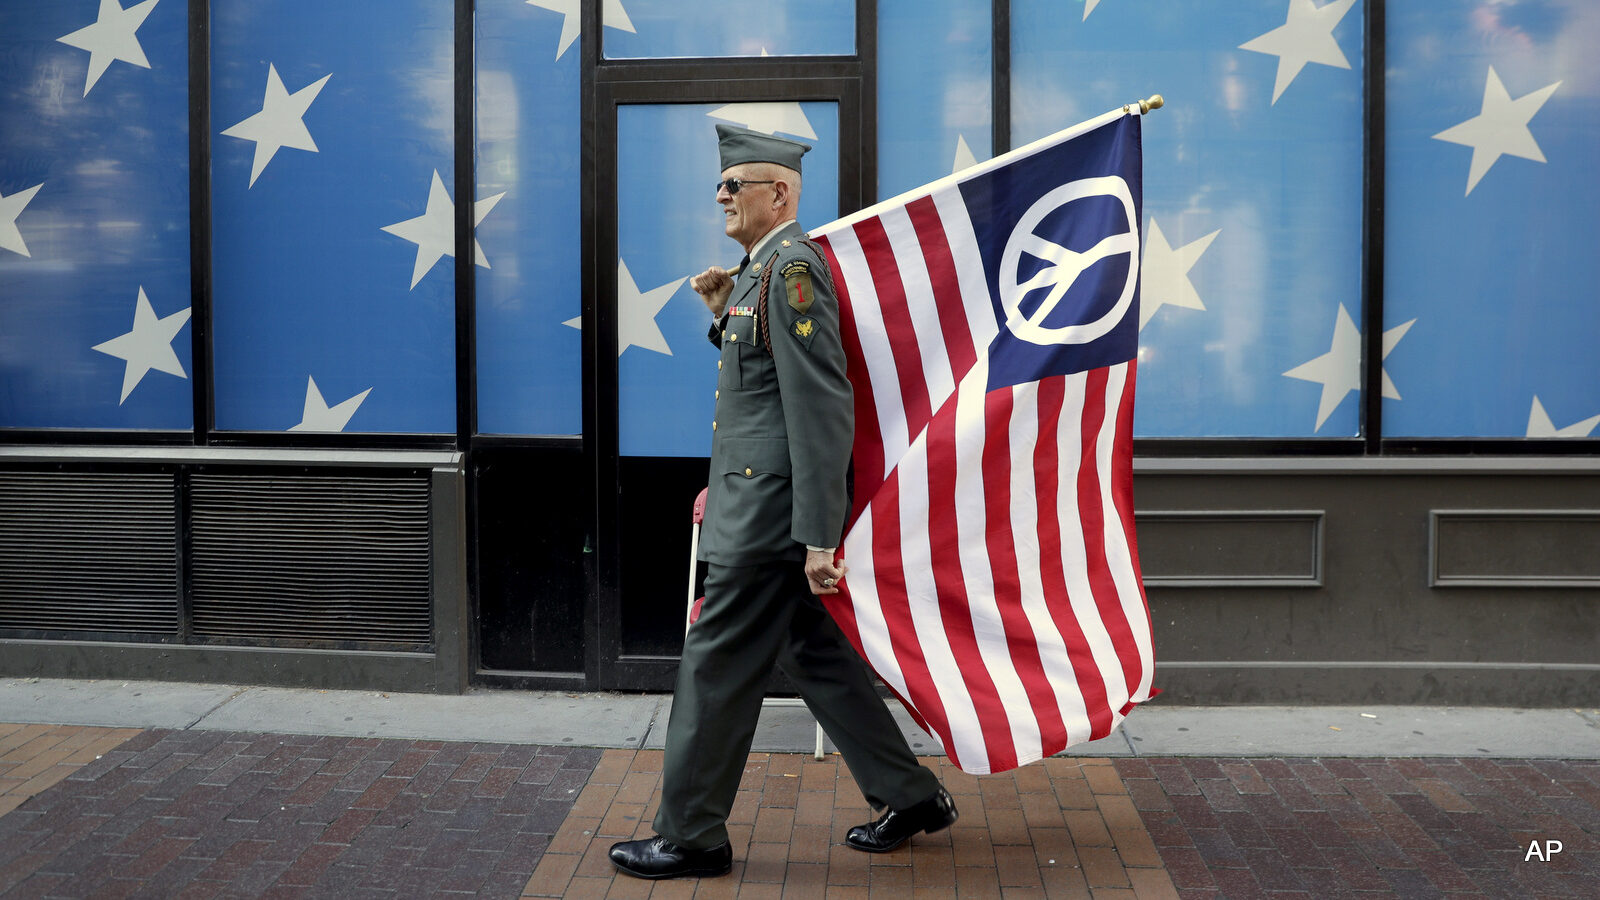 A protester carrying a peace flag walks in downtown Cleveland, Sunday, July 17, 2016, in preparation for the Republican National Convention that starts Monday.